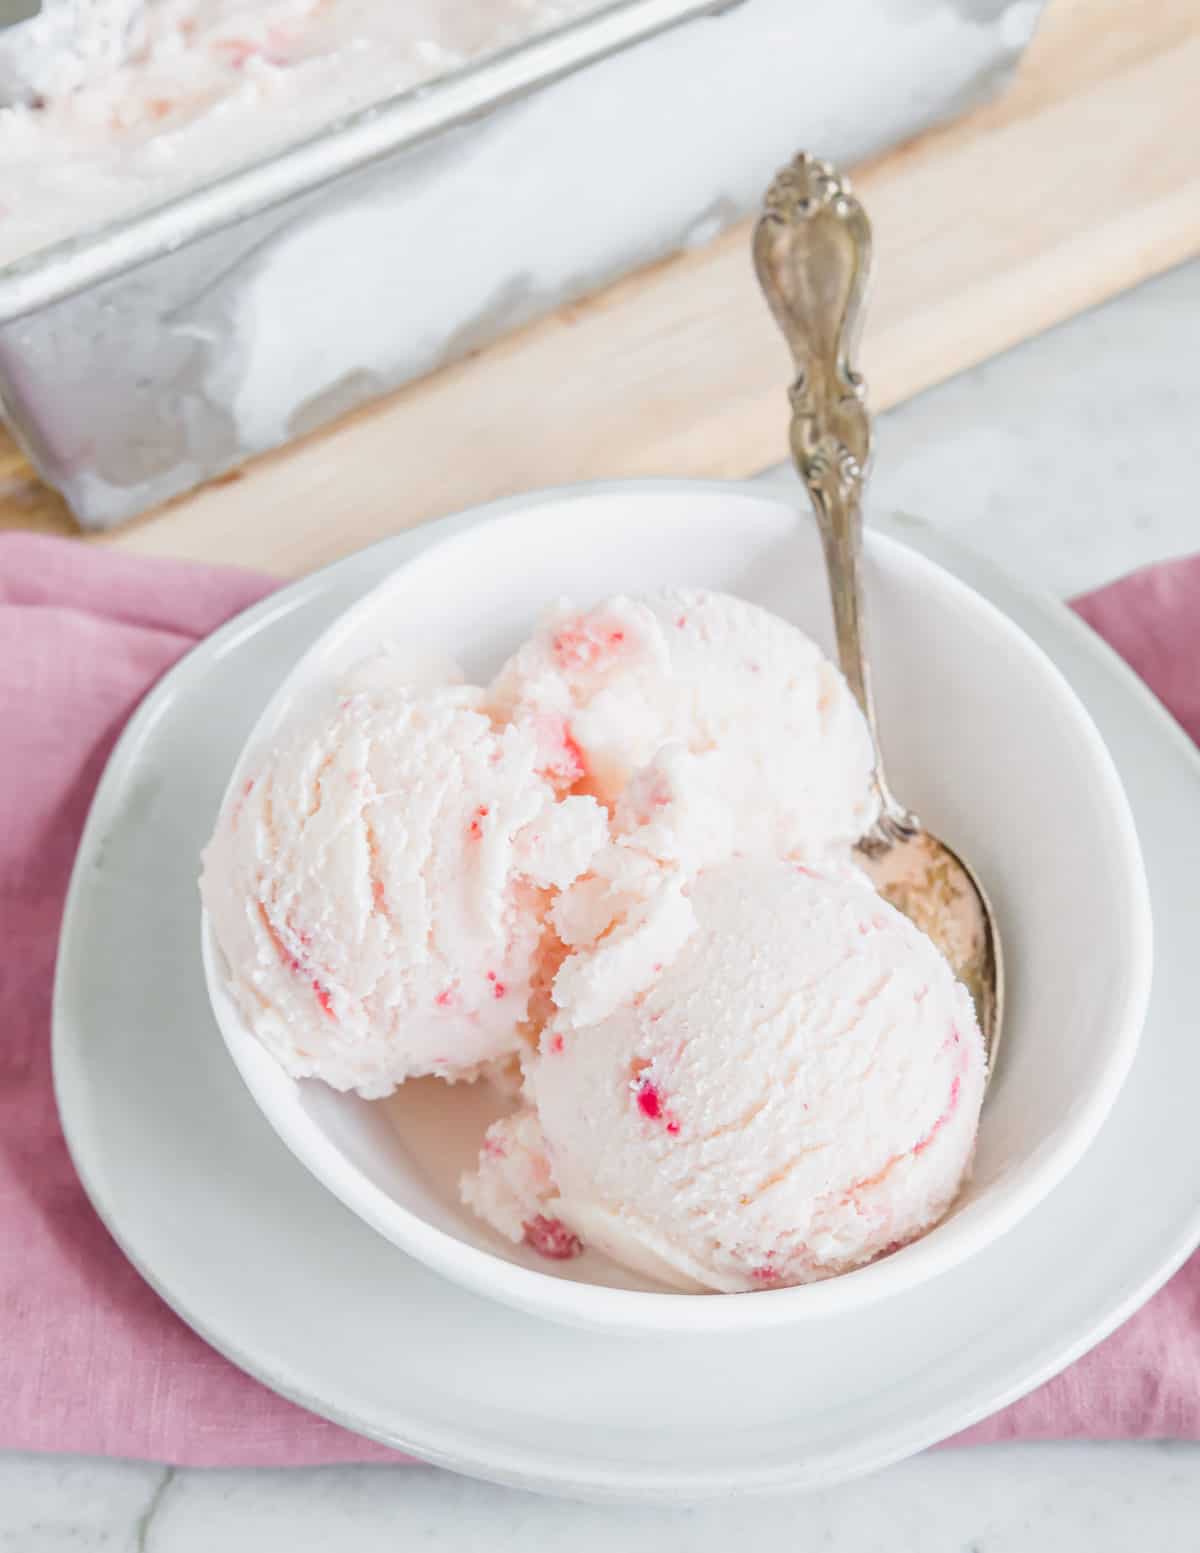 Strawberry vanilla kefir ice cream in a white bowl with a spoon.